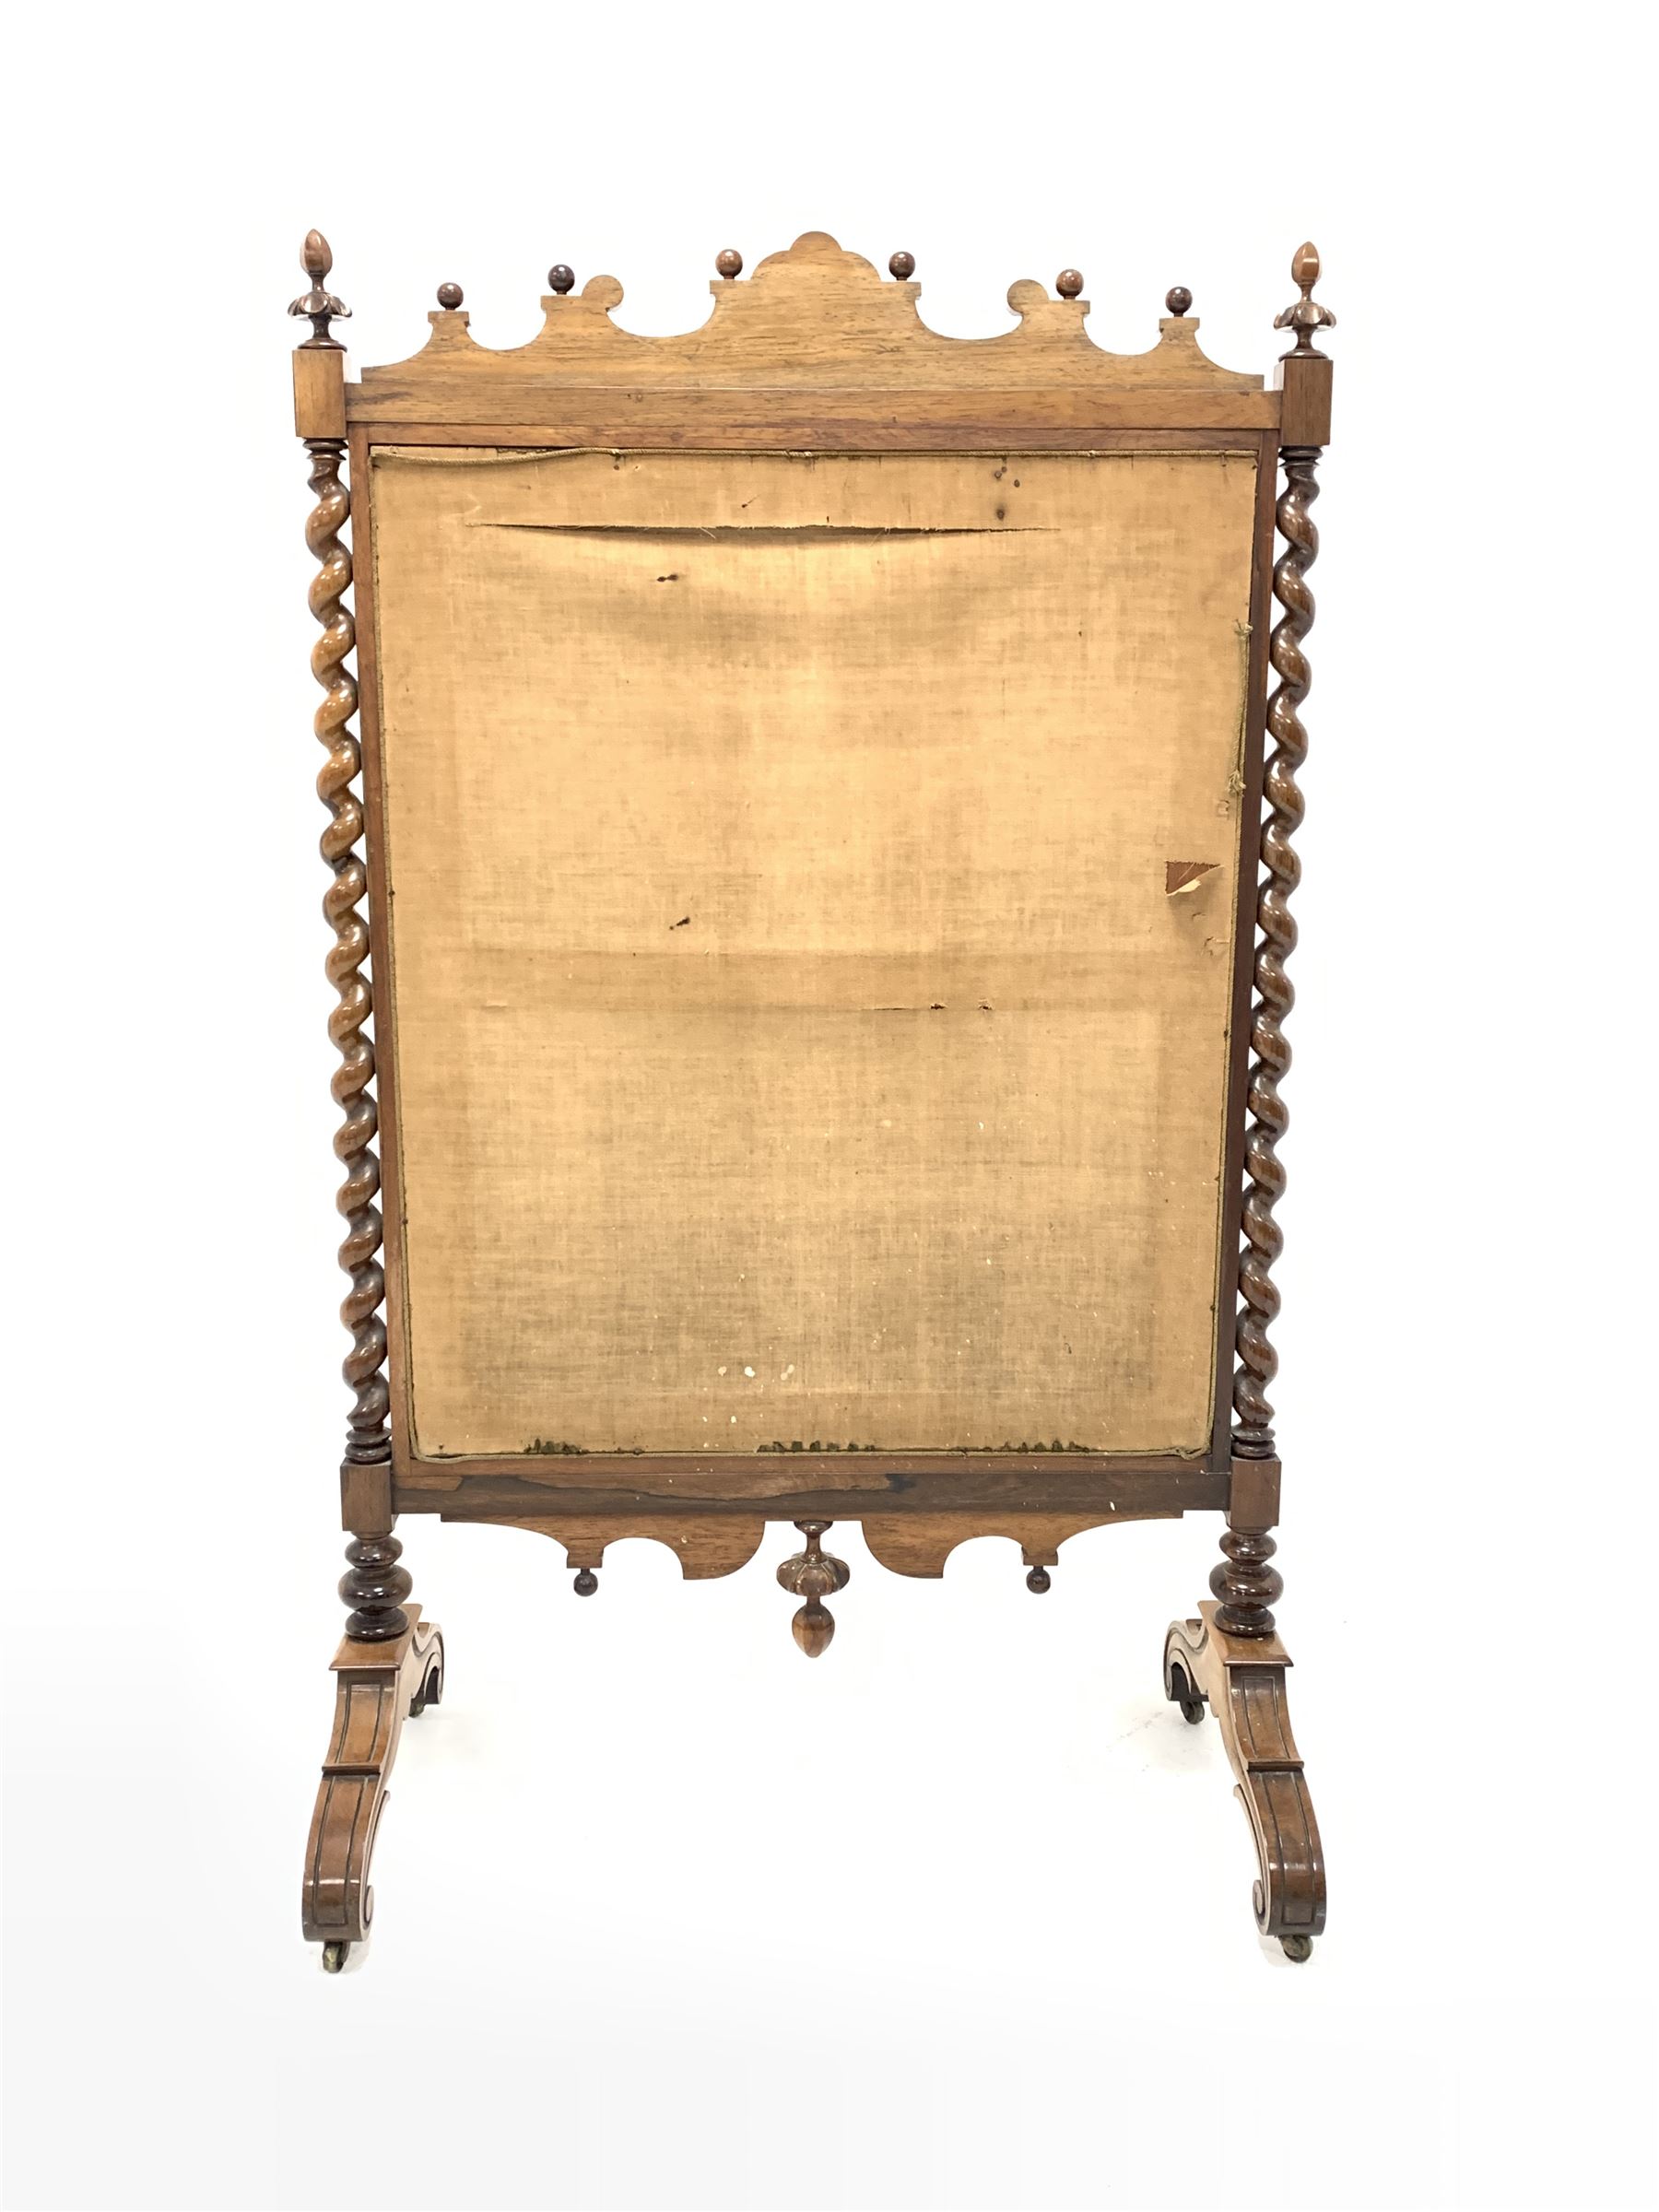 Victorian rosewood fire screen - Image 2 of 2